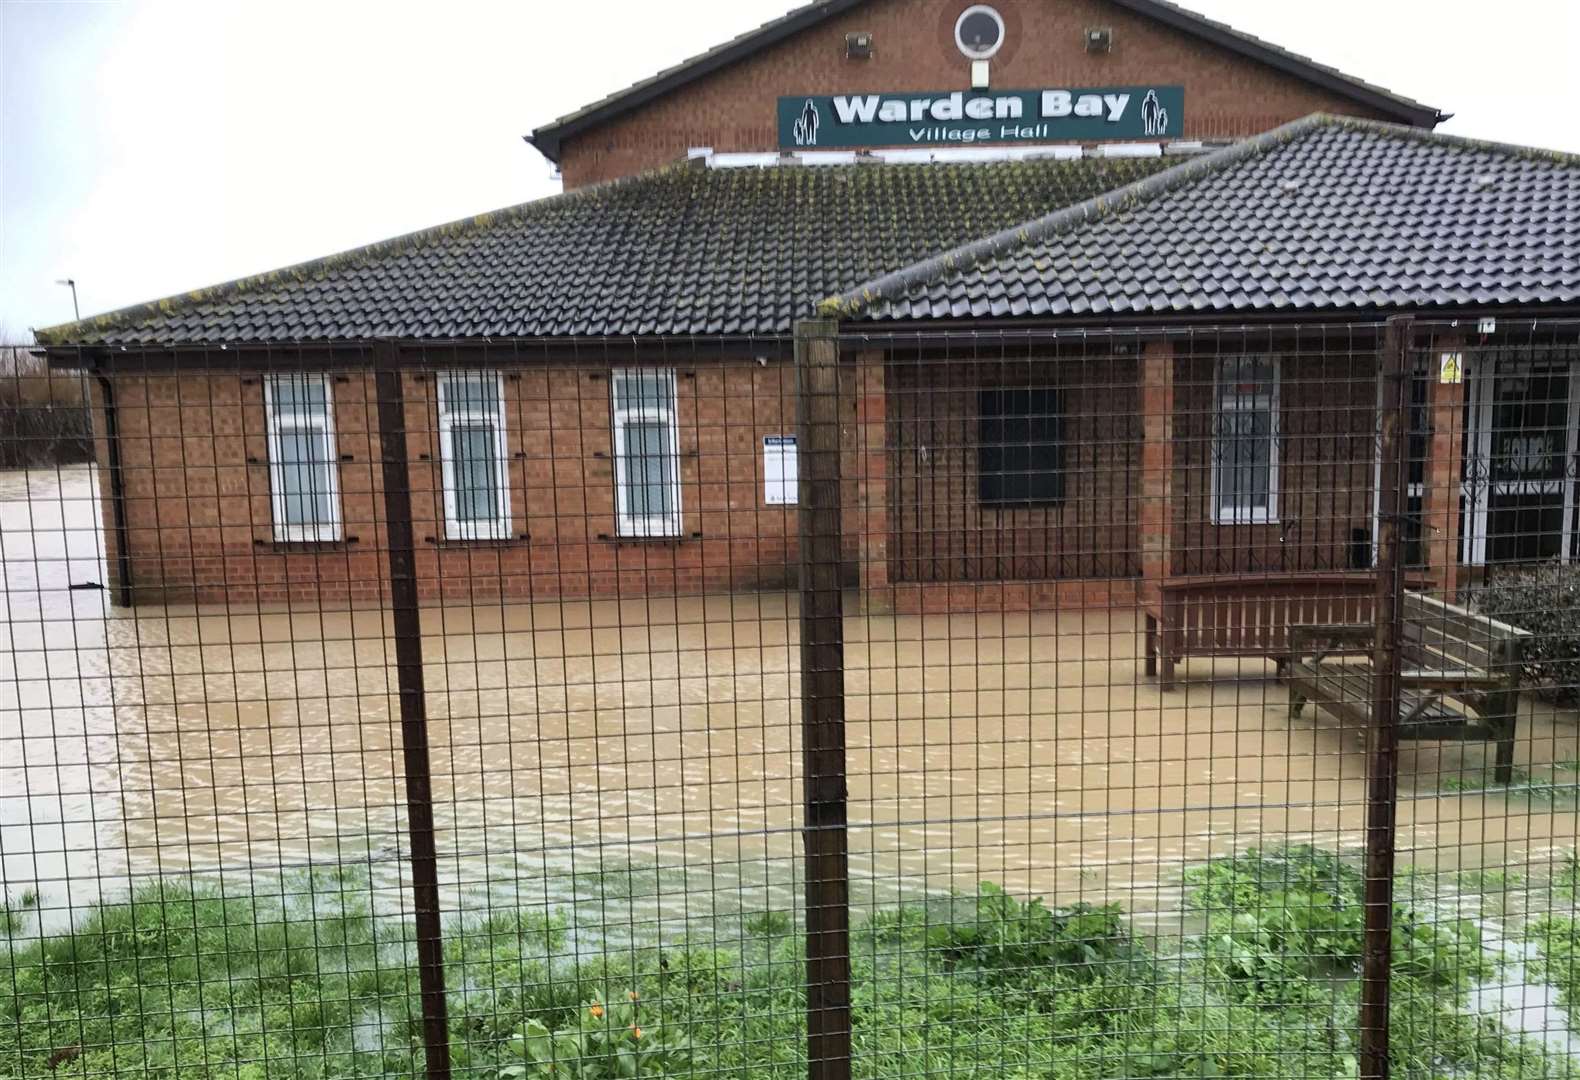 Warden Bay Village Hall has flooded. Picture: Danny Street